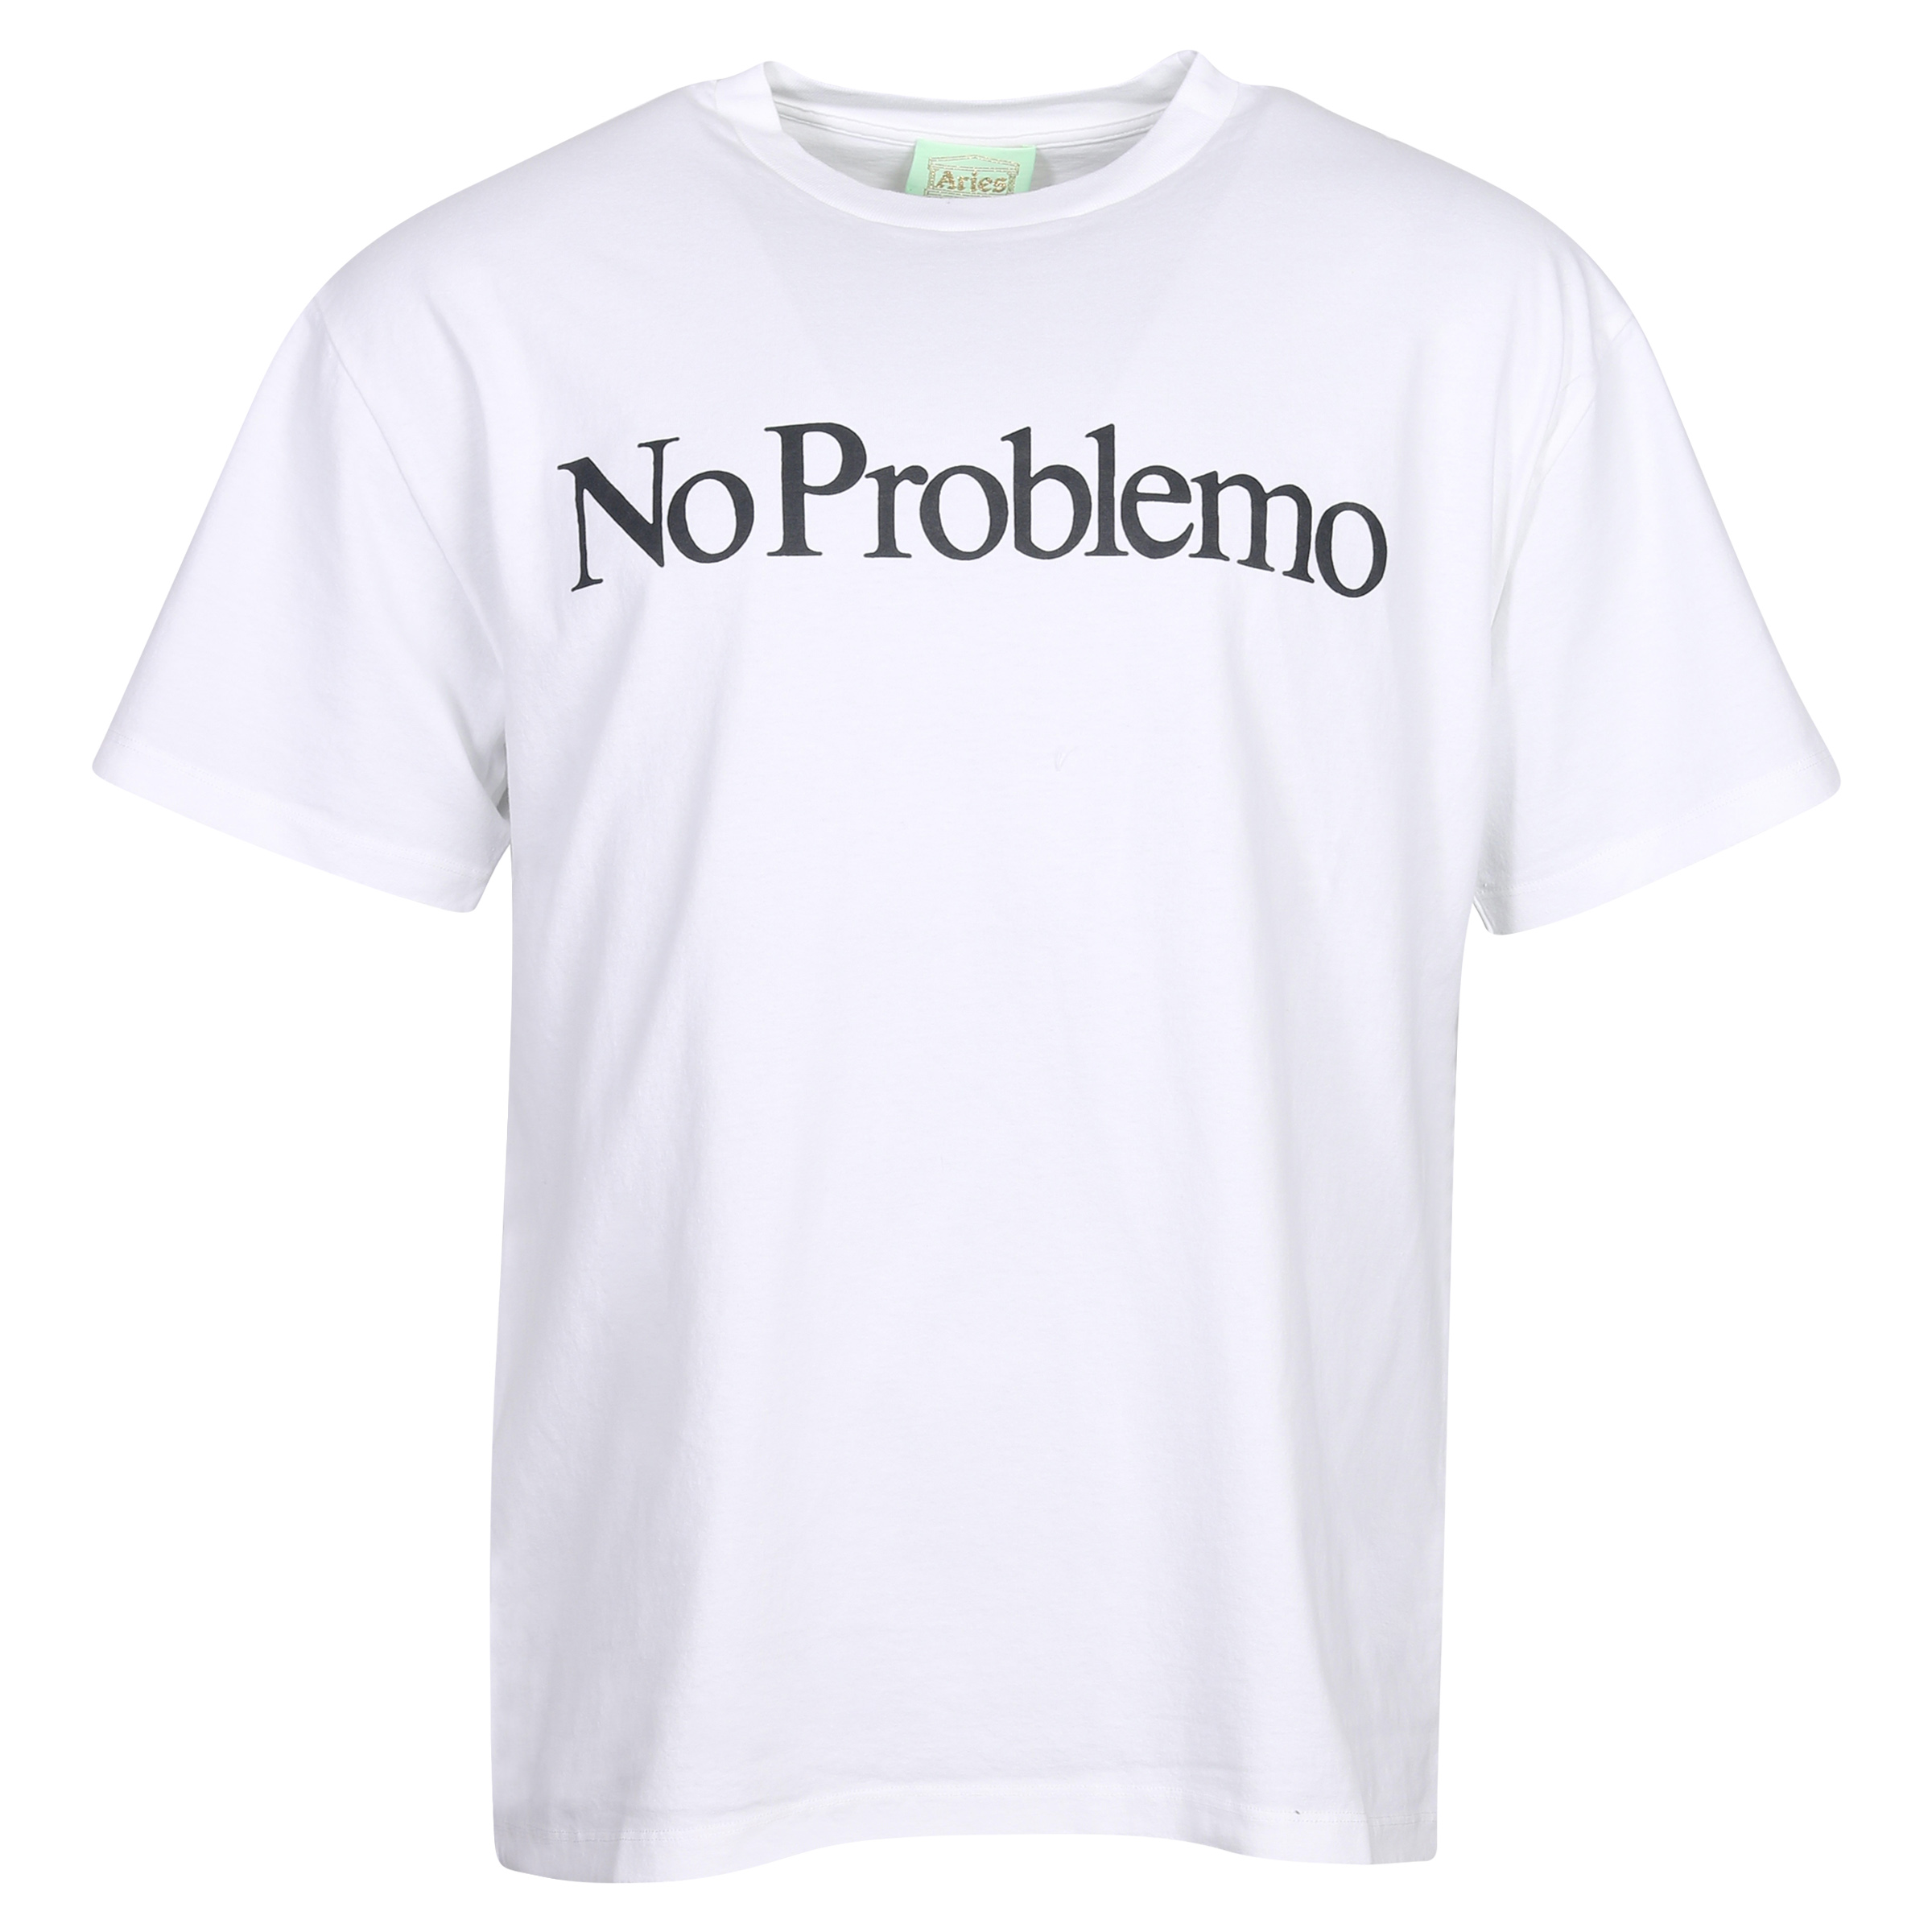 Unisex Aries Classic No Problemo T-Shirt in White